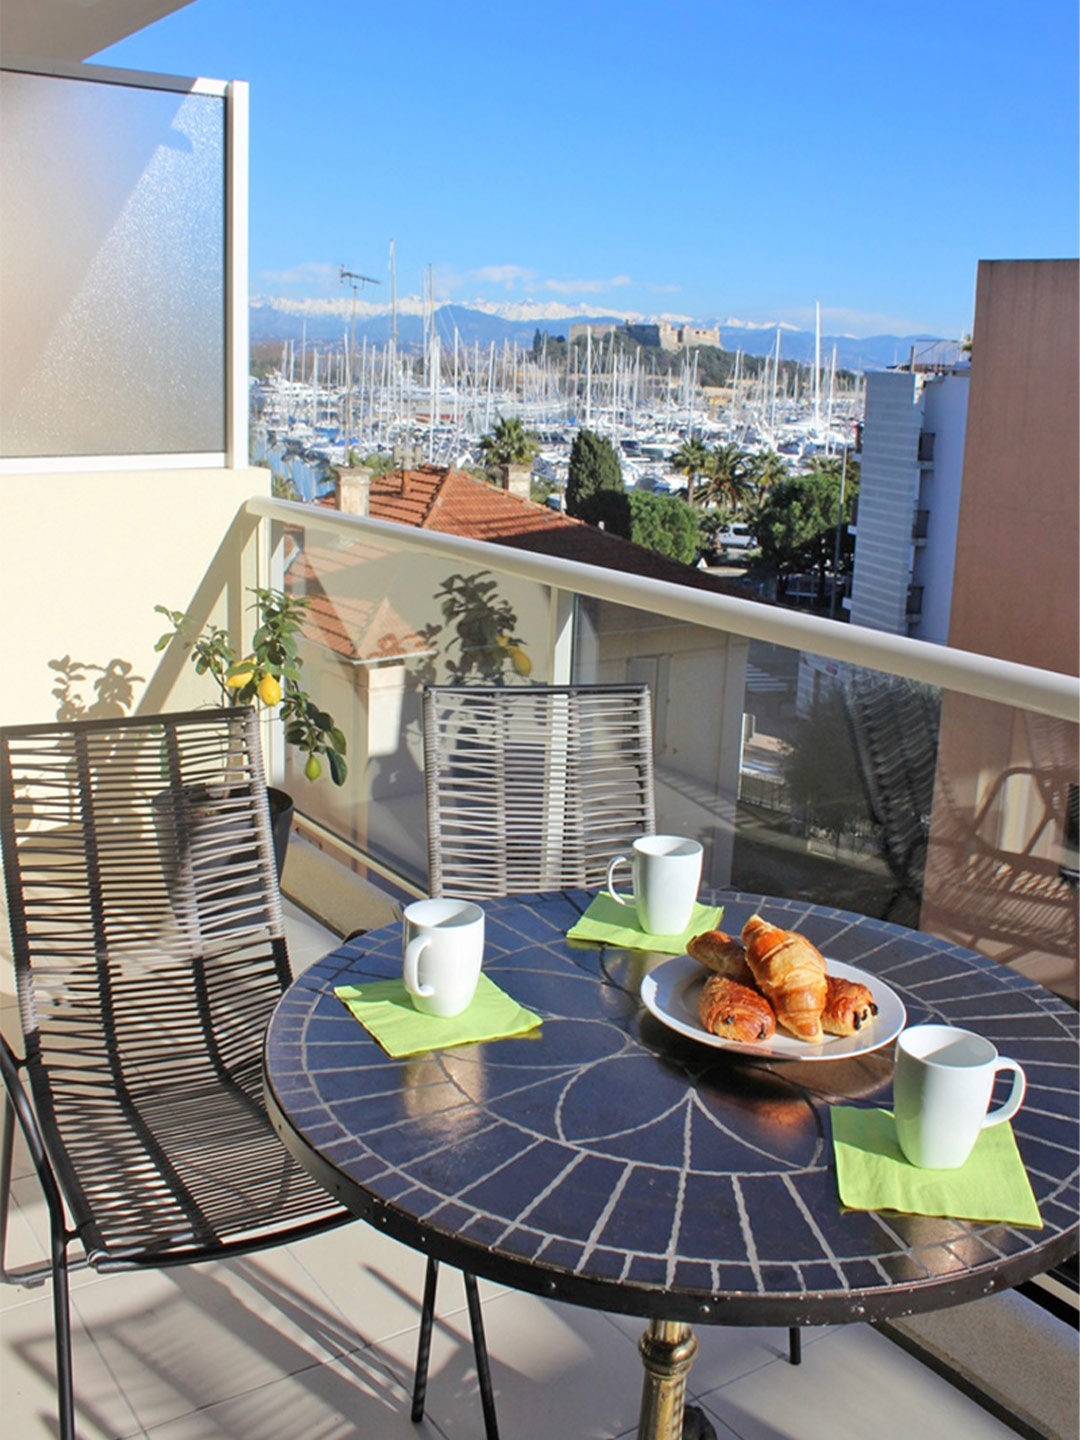 Le Corazur – A nice apartment with a perfect location near the harbour and the beach